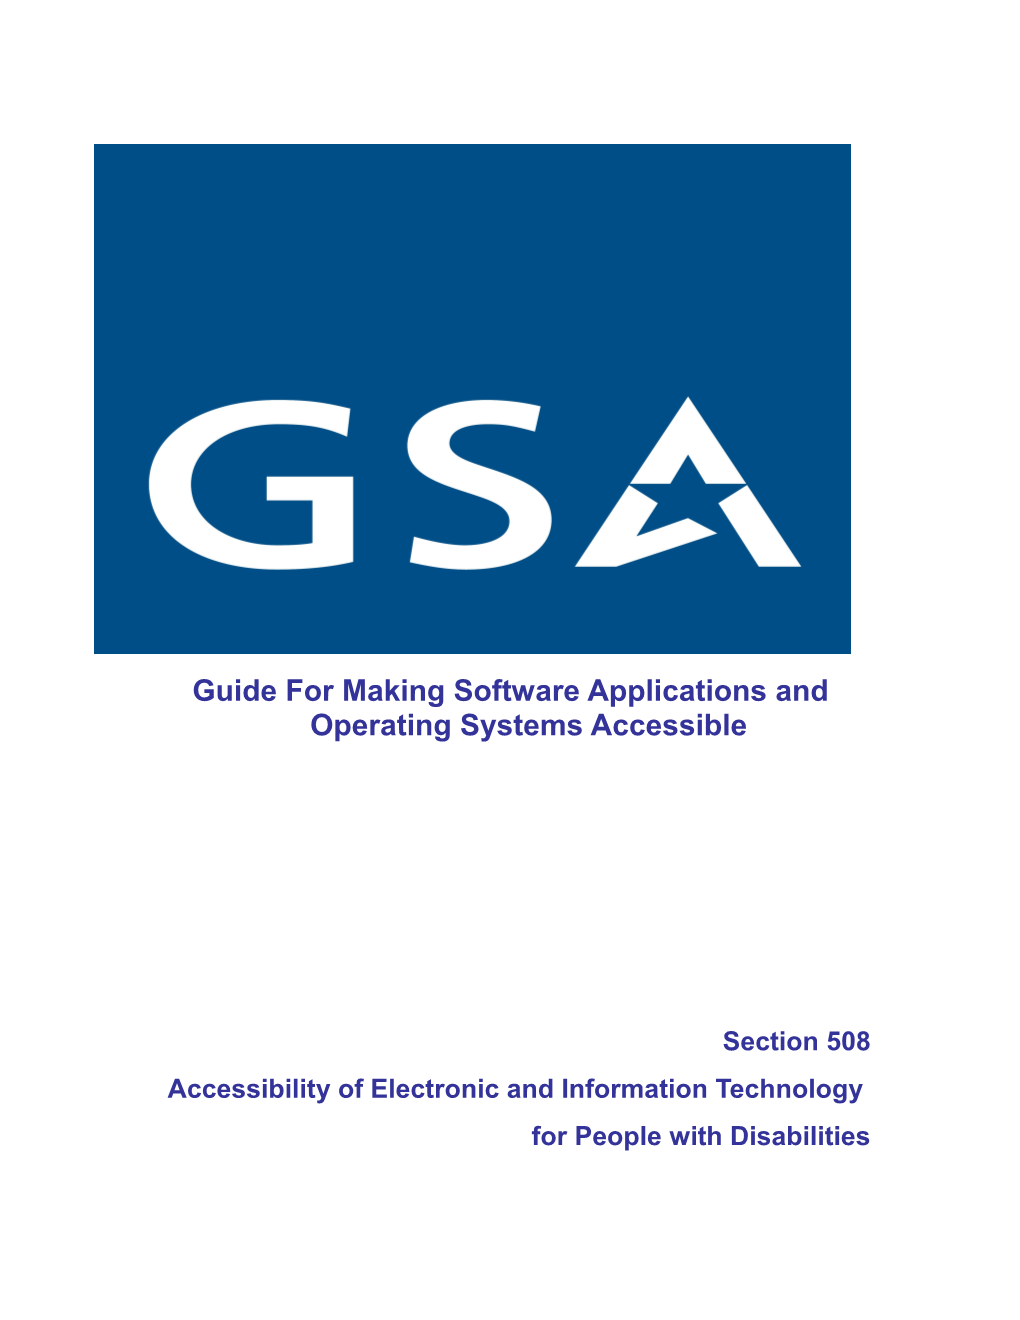 Guide to 508 Compliant Software Applications and Operating Systems